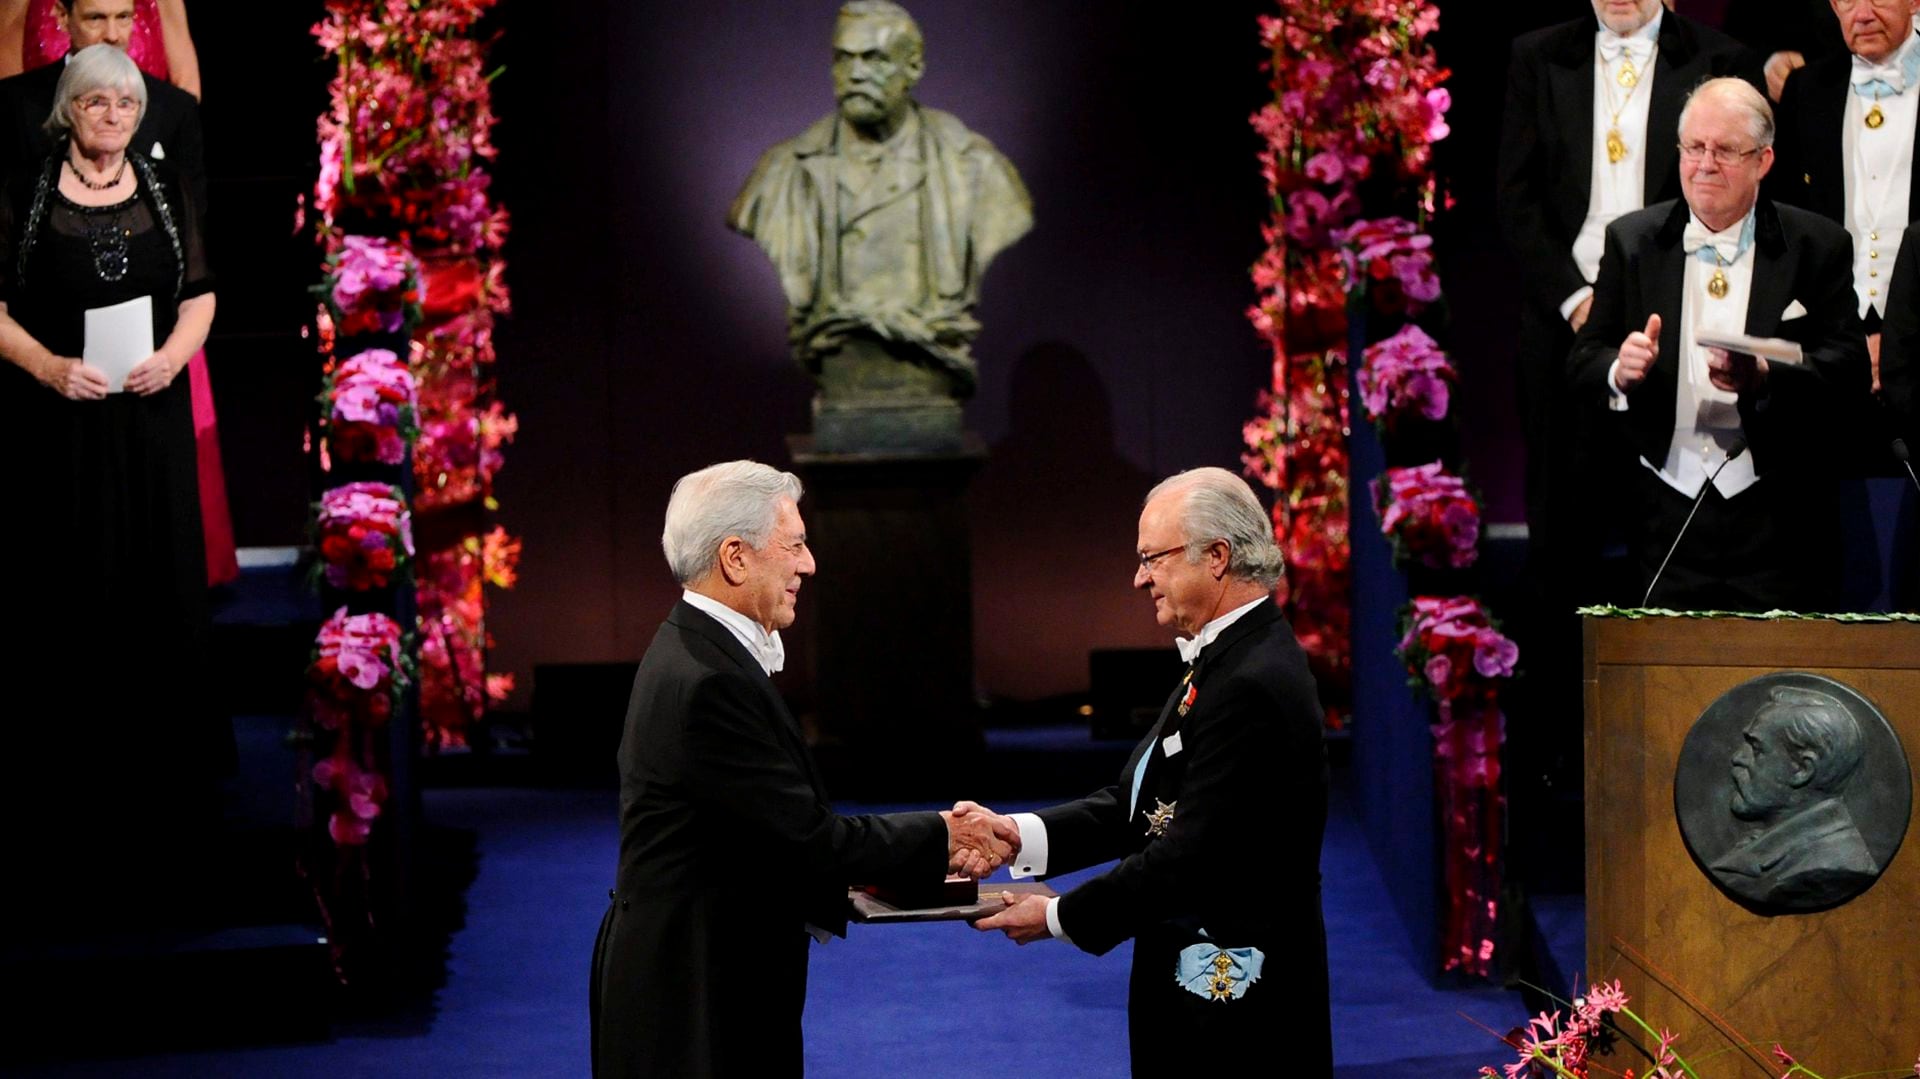 The moment when the Nobel Prize in Literature was awarded to the Peruvian writer Mario Vargas Llosa, in 2010. (EFE)